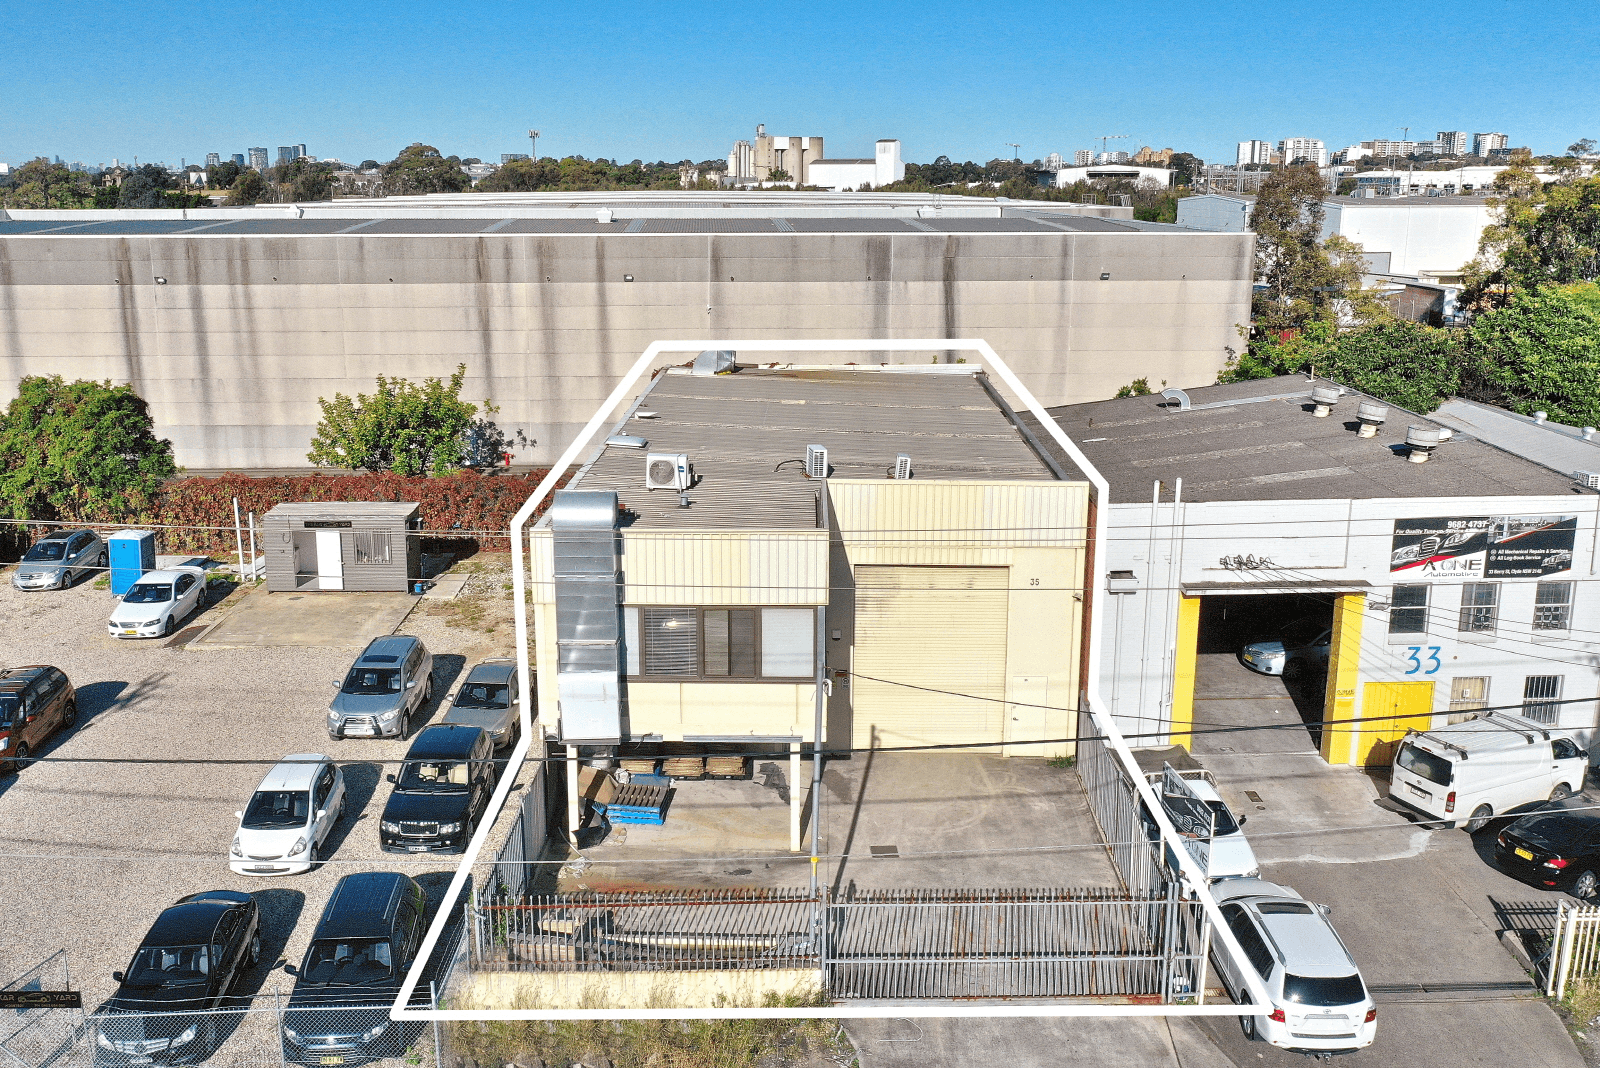 35 Berry Street, CLYDE, NSW 2142